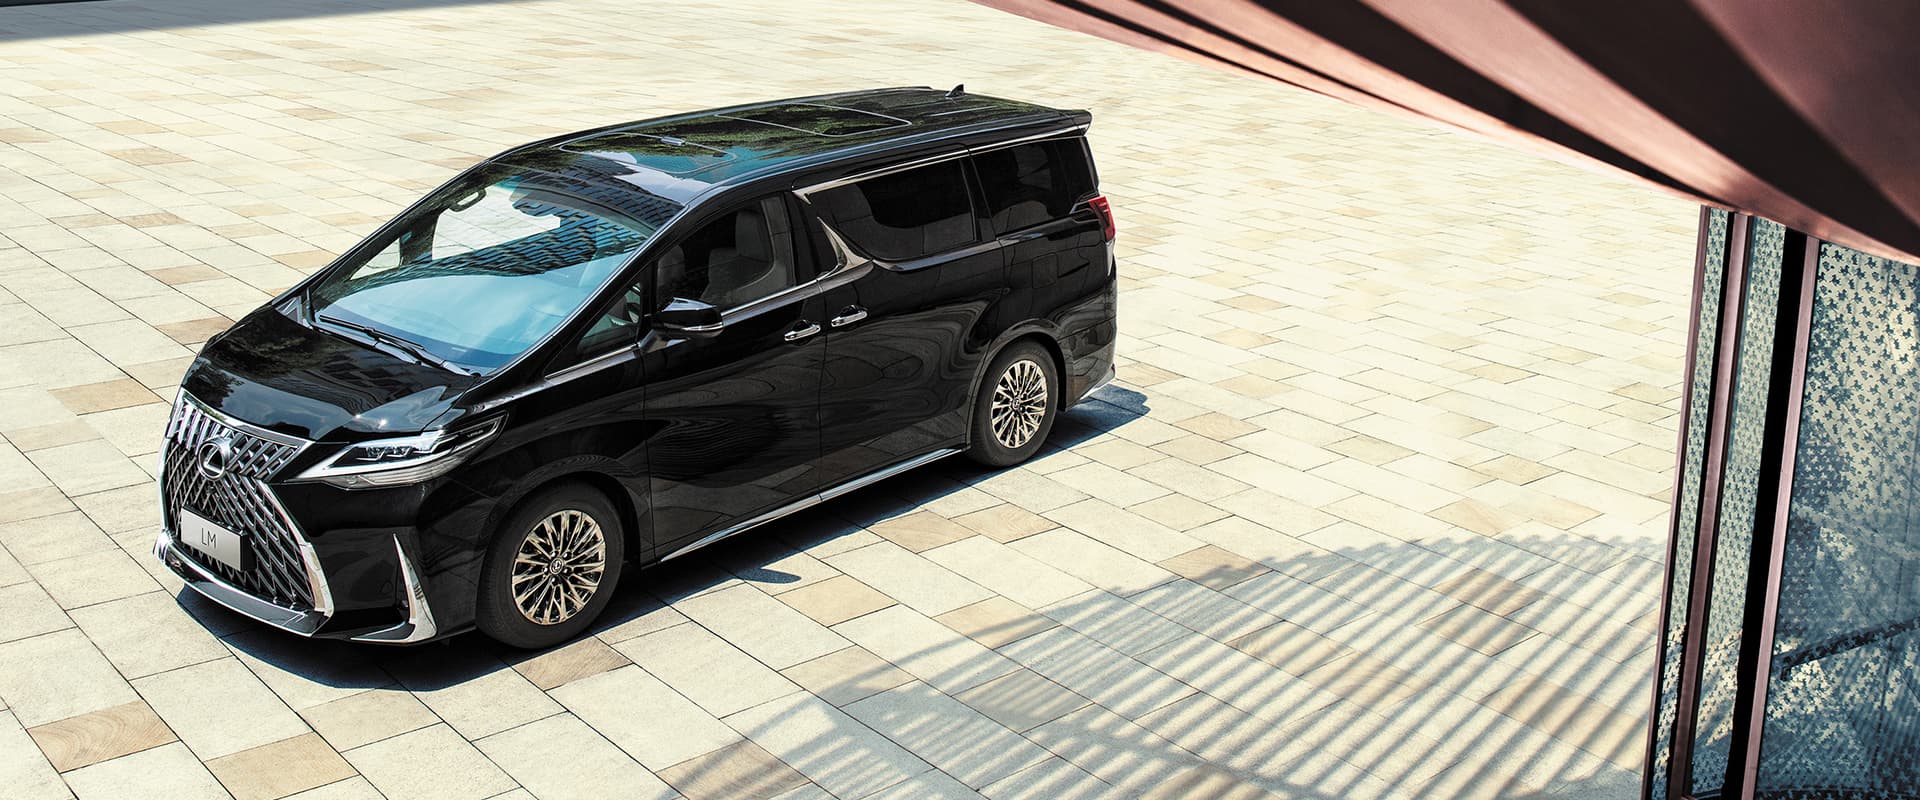 New Lexus LM Ultra-Luxurious MPV Makes Official Debut - Looks Fantabulous! - back